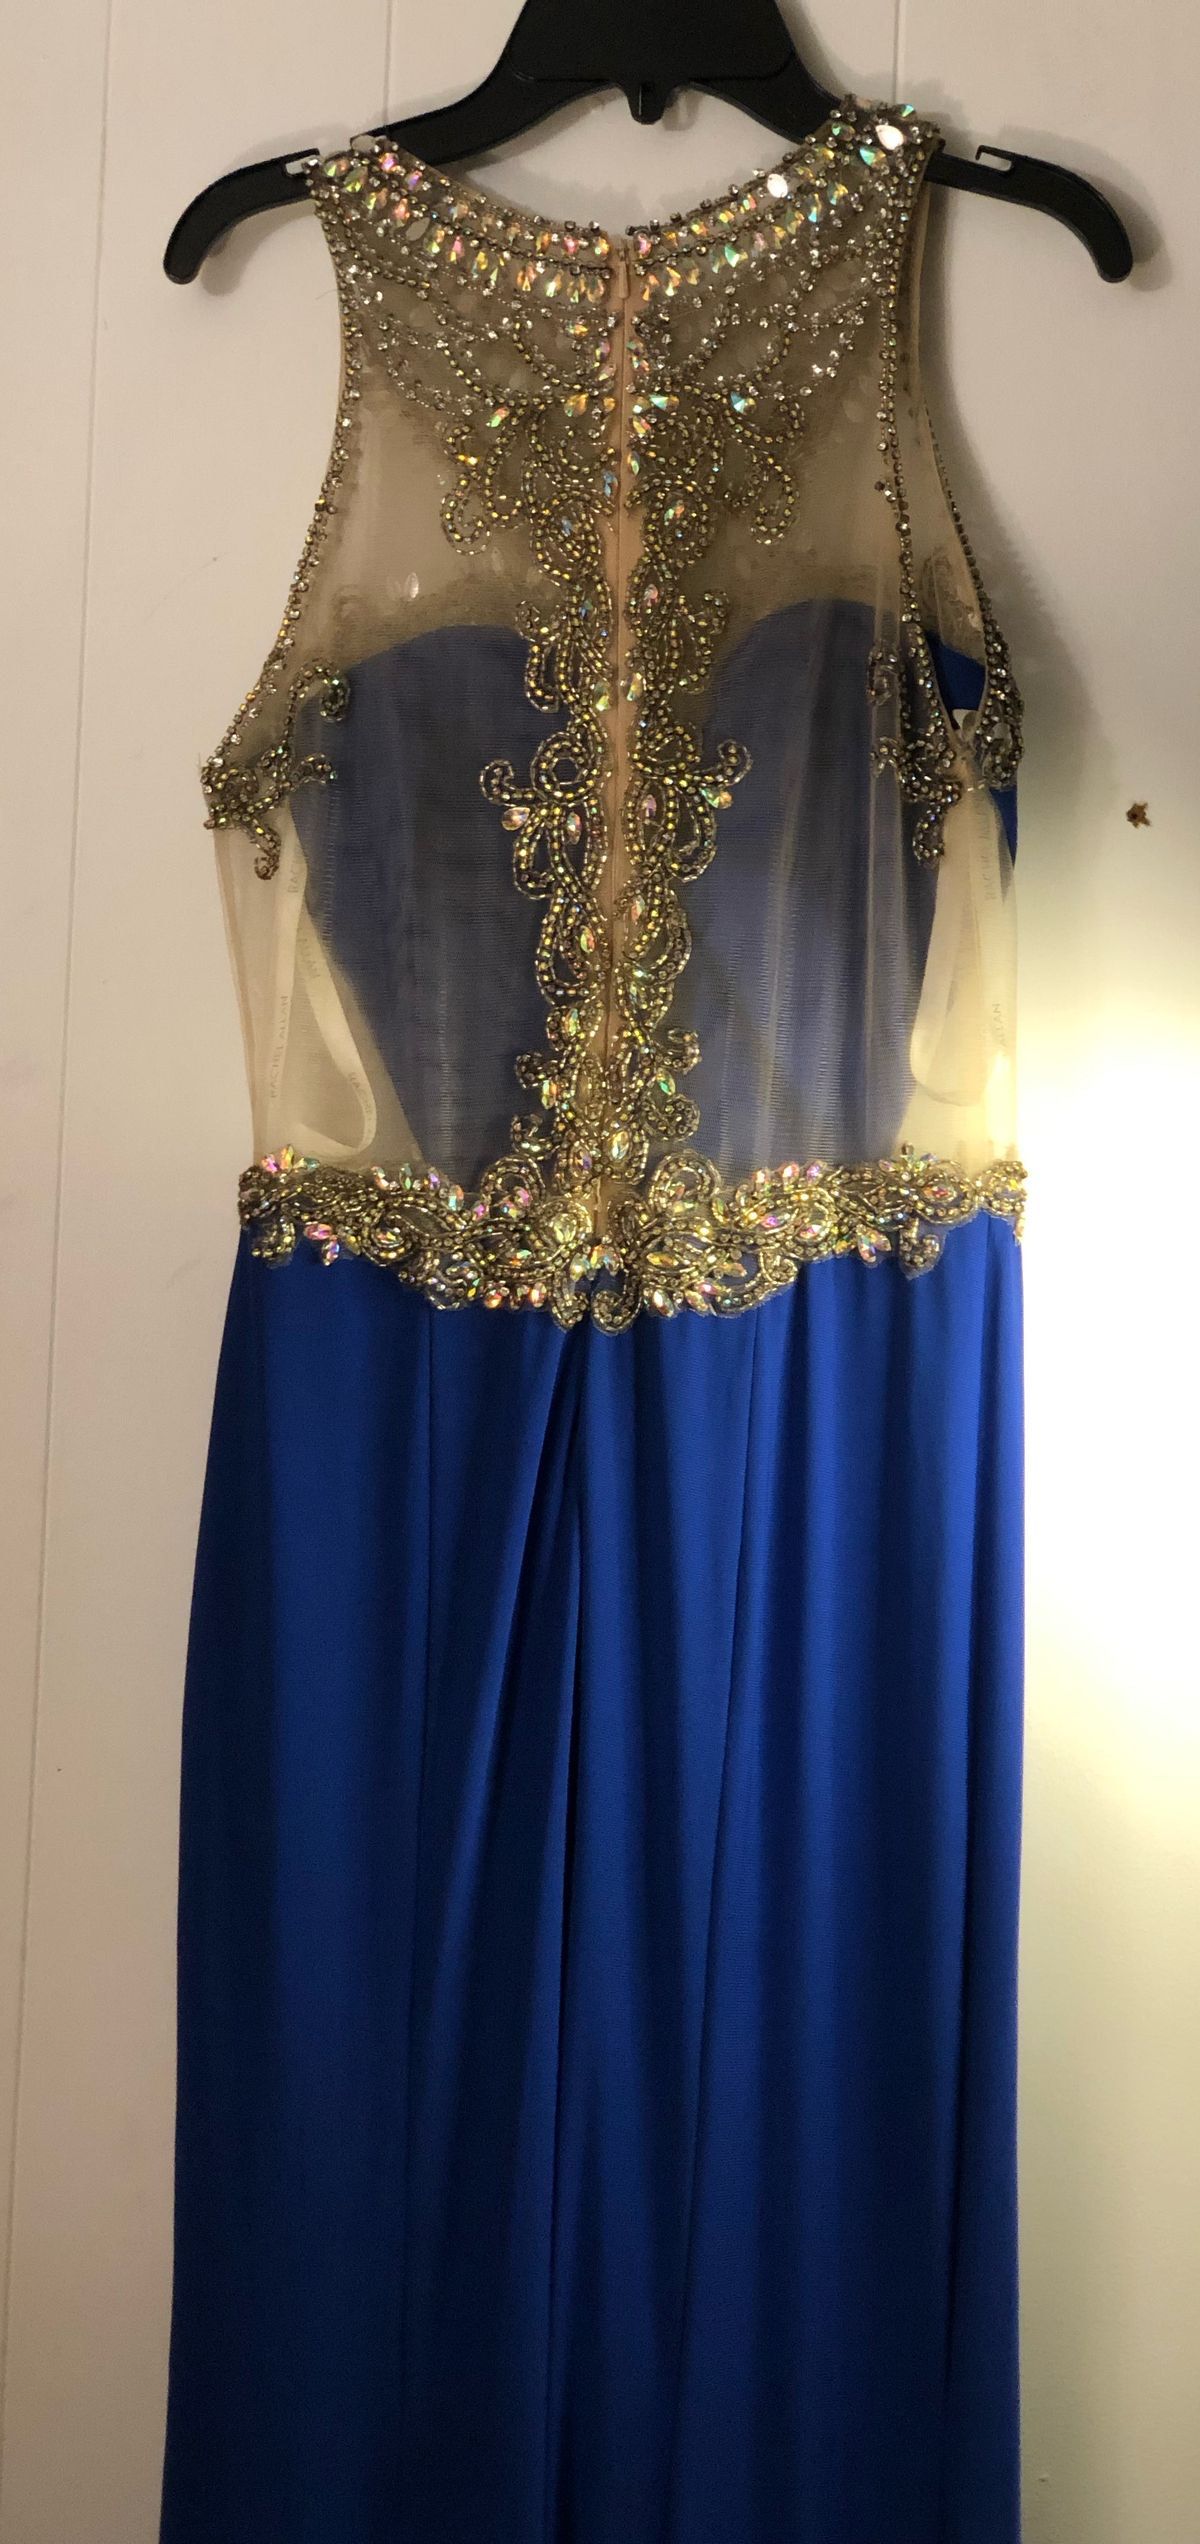 Rachel Allan Size 6 Prom Royal Blue Dress With Train on Queenly